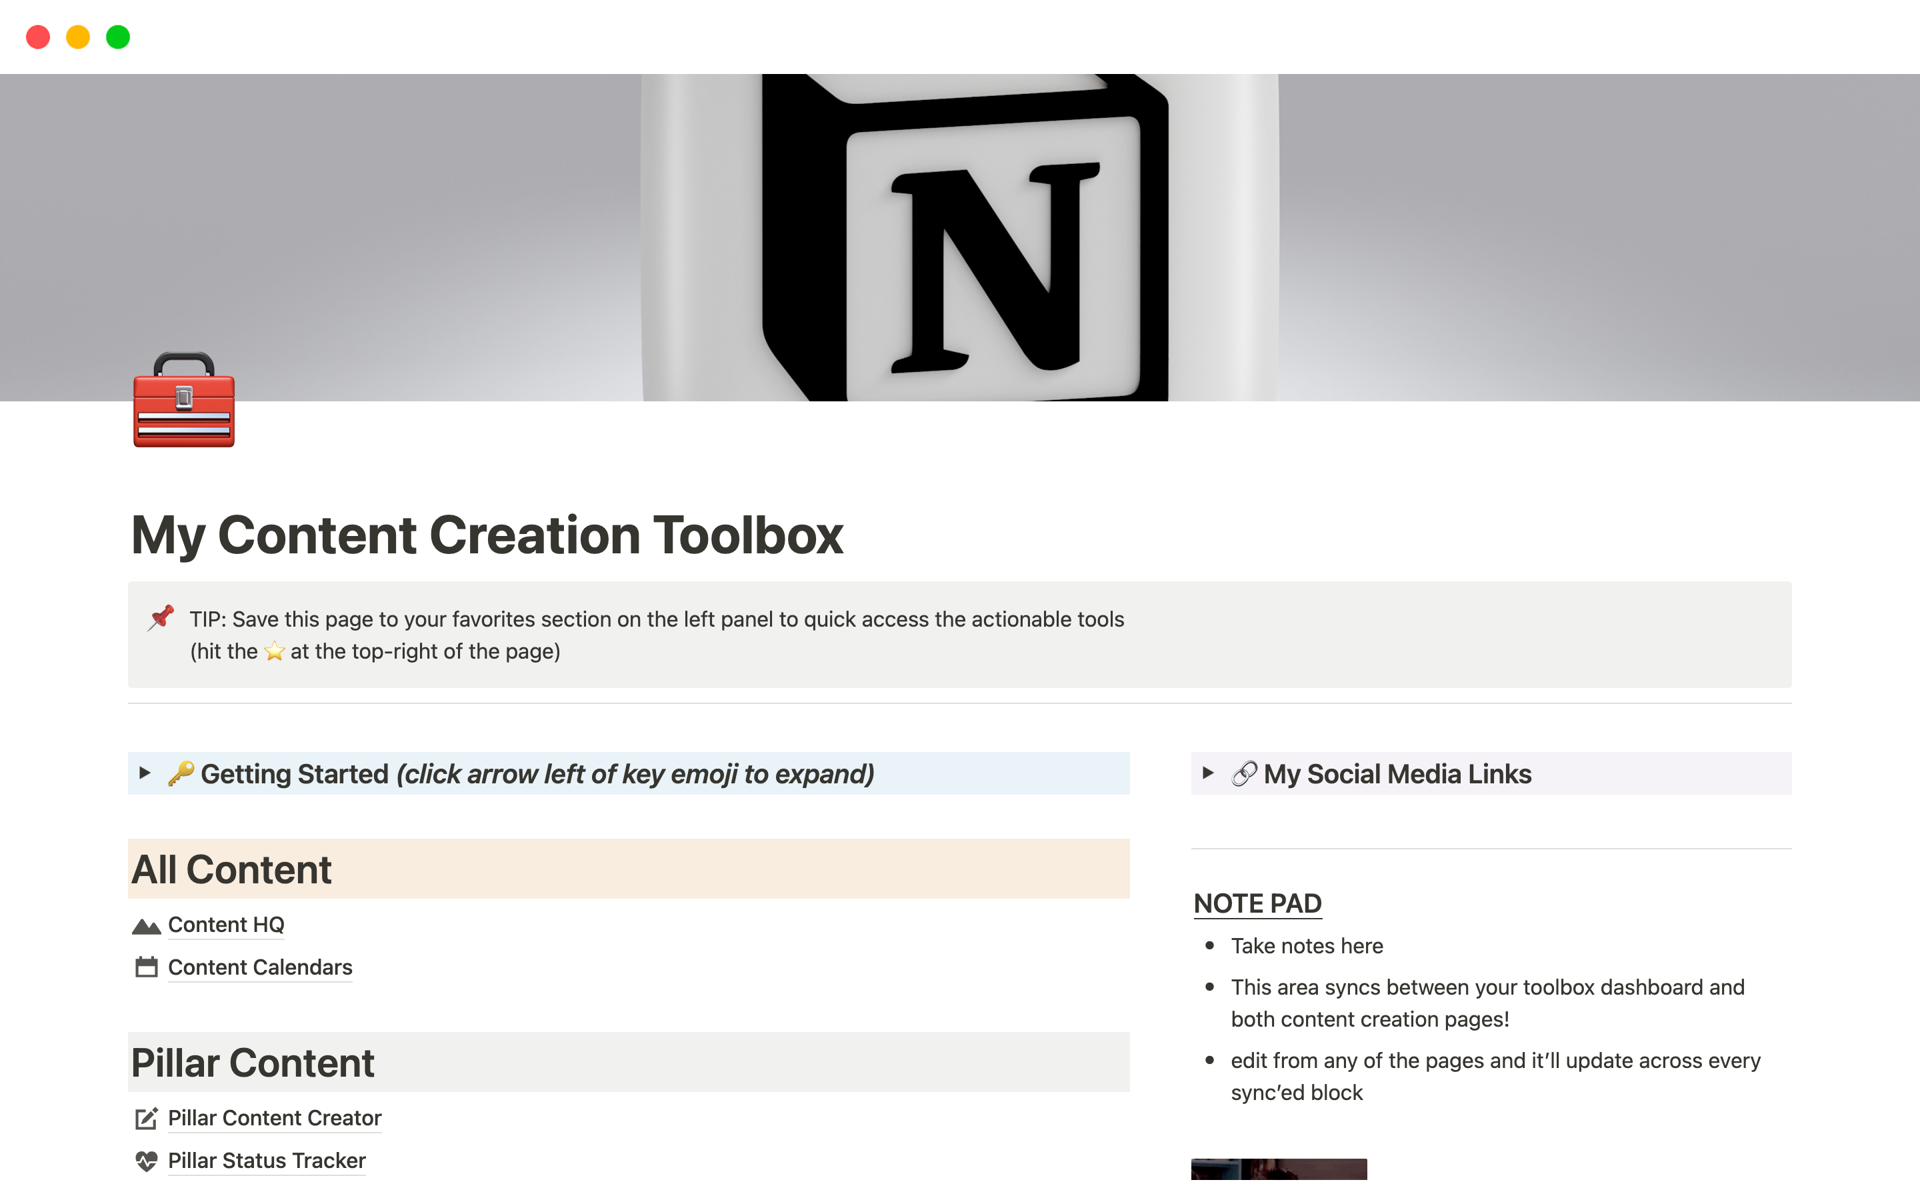 Capture ideas, create, edit, and manage all of your content right inside of notion.